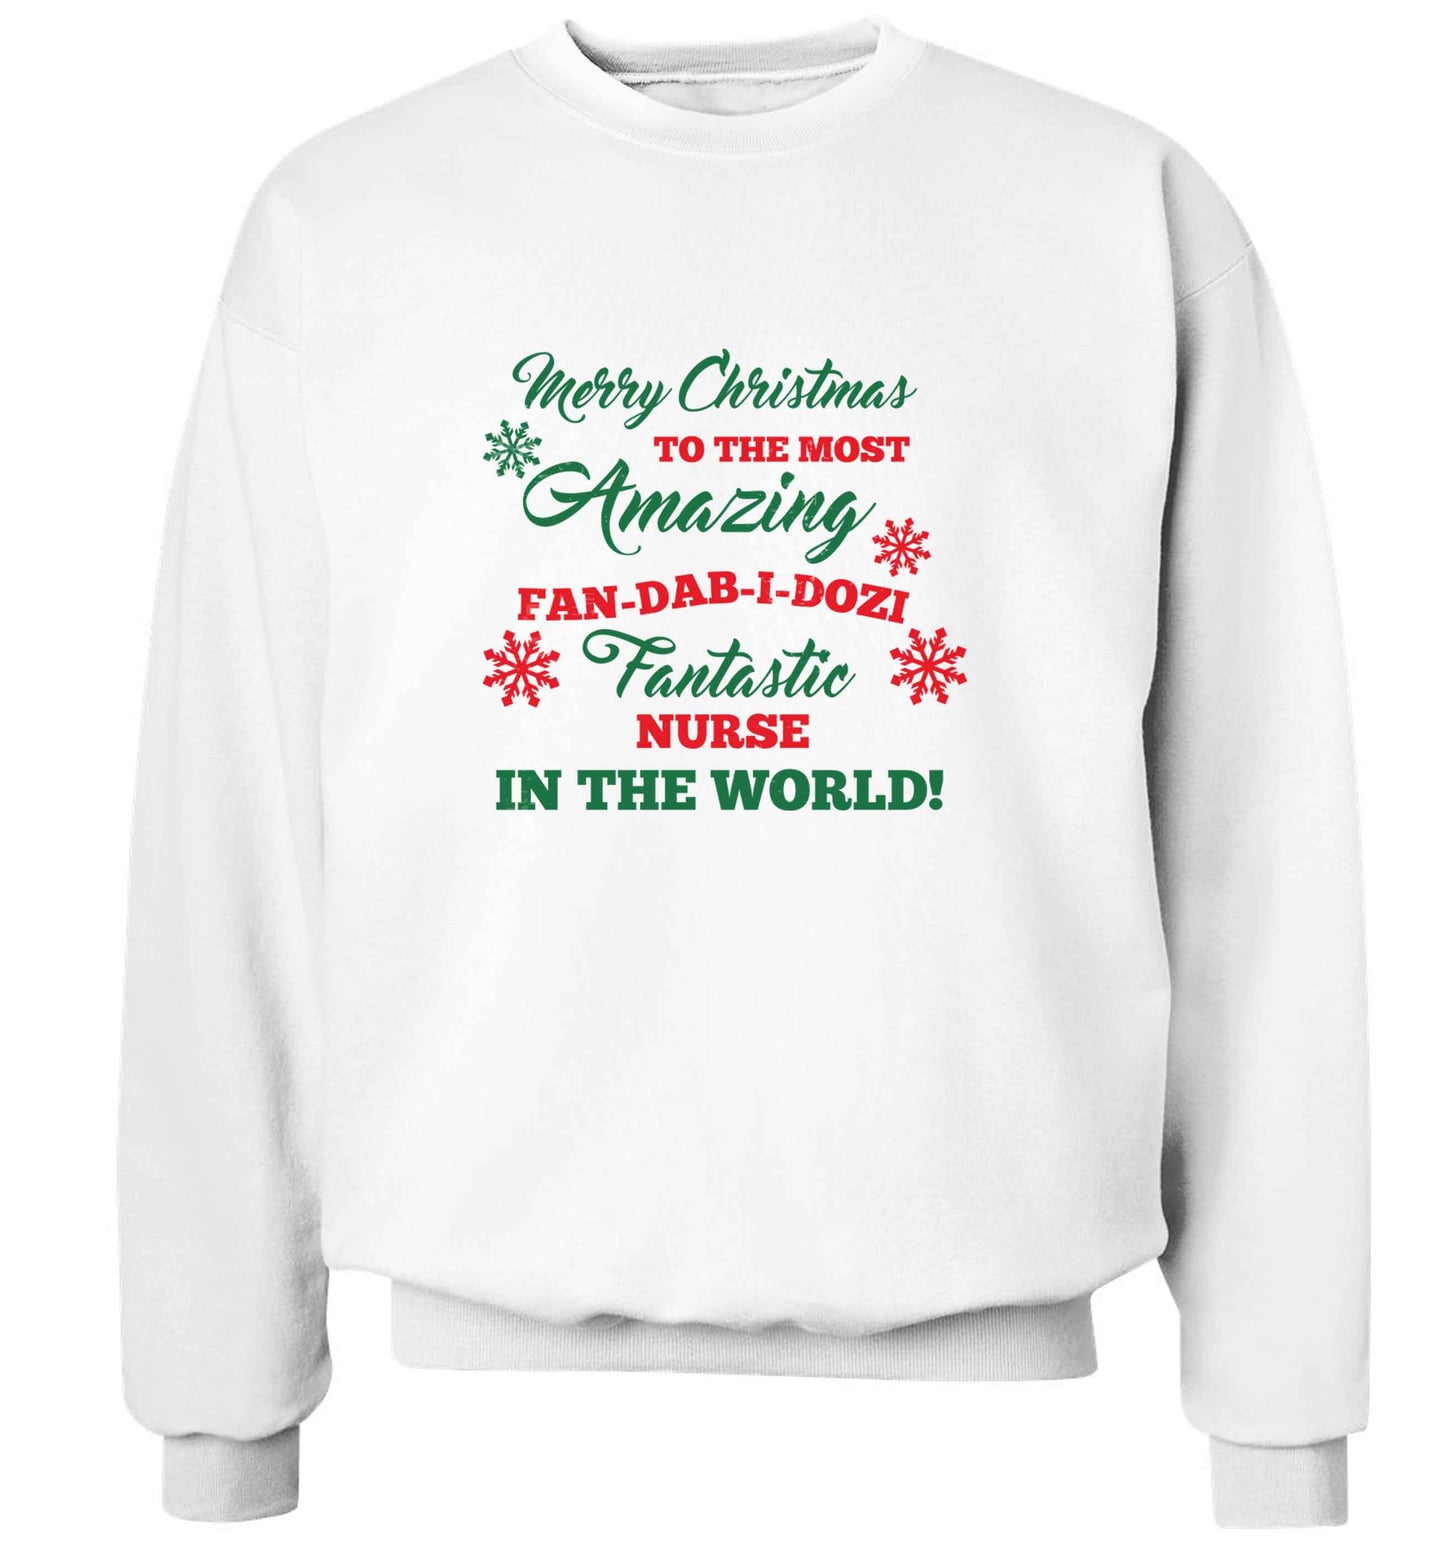 Merry Christmas to the most amazing nurse in the world! adult's unisex white sweater 2XL